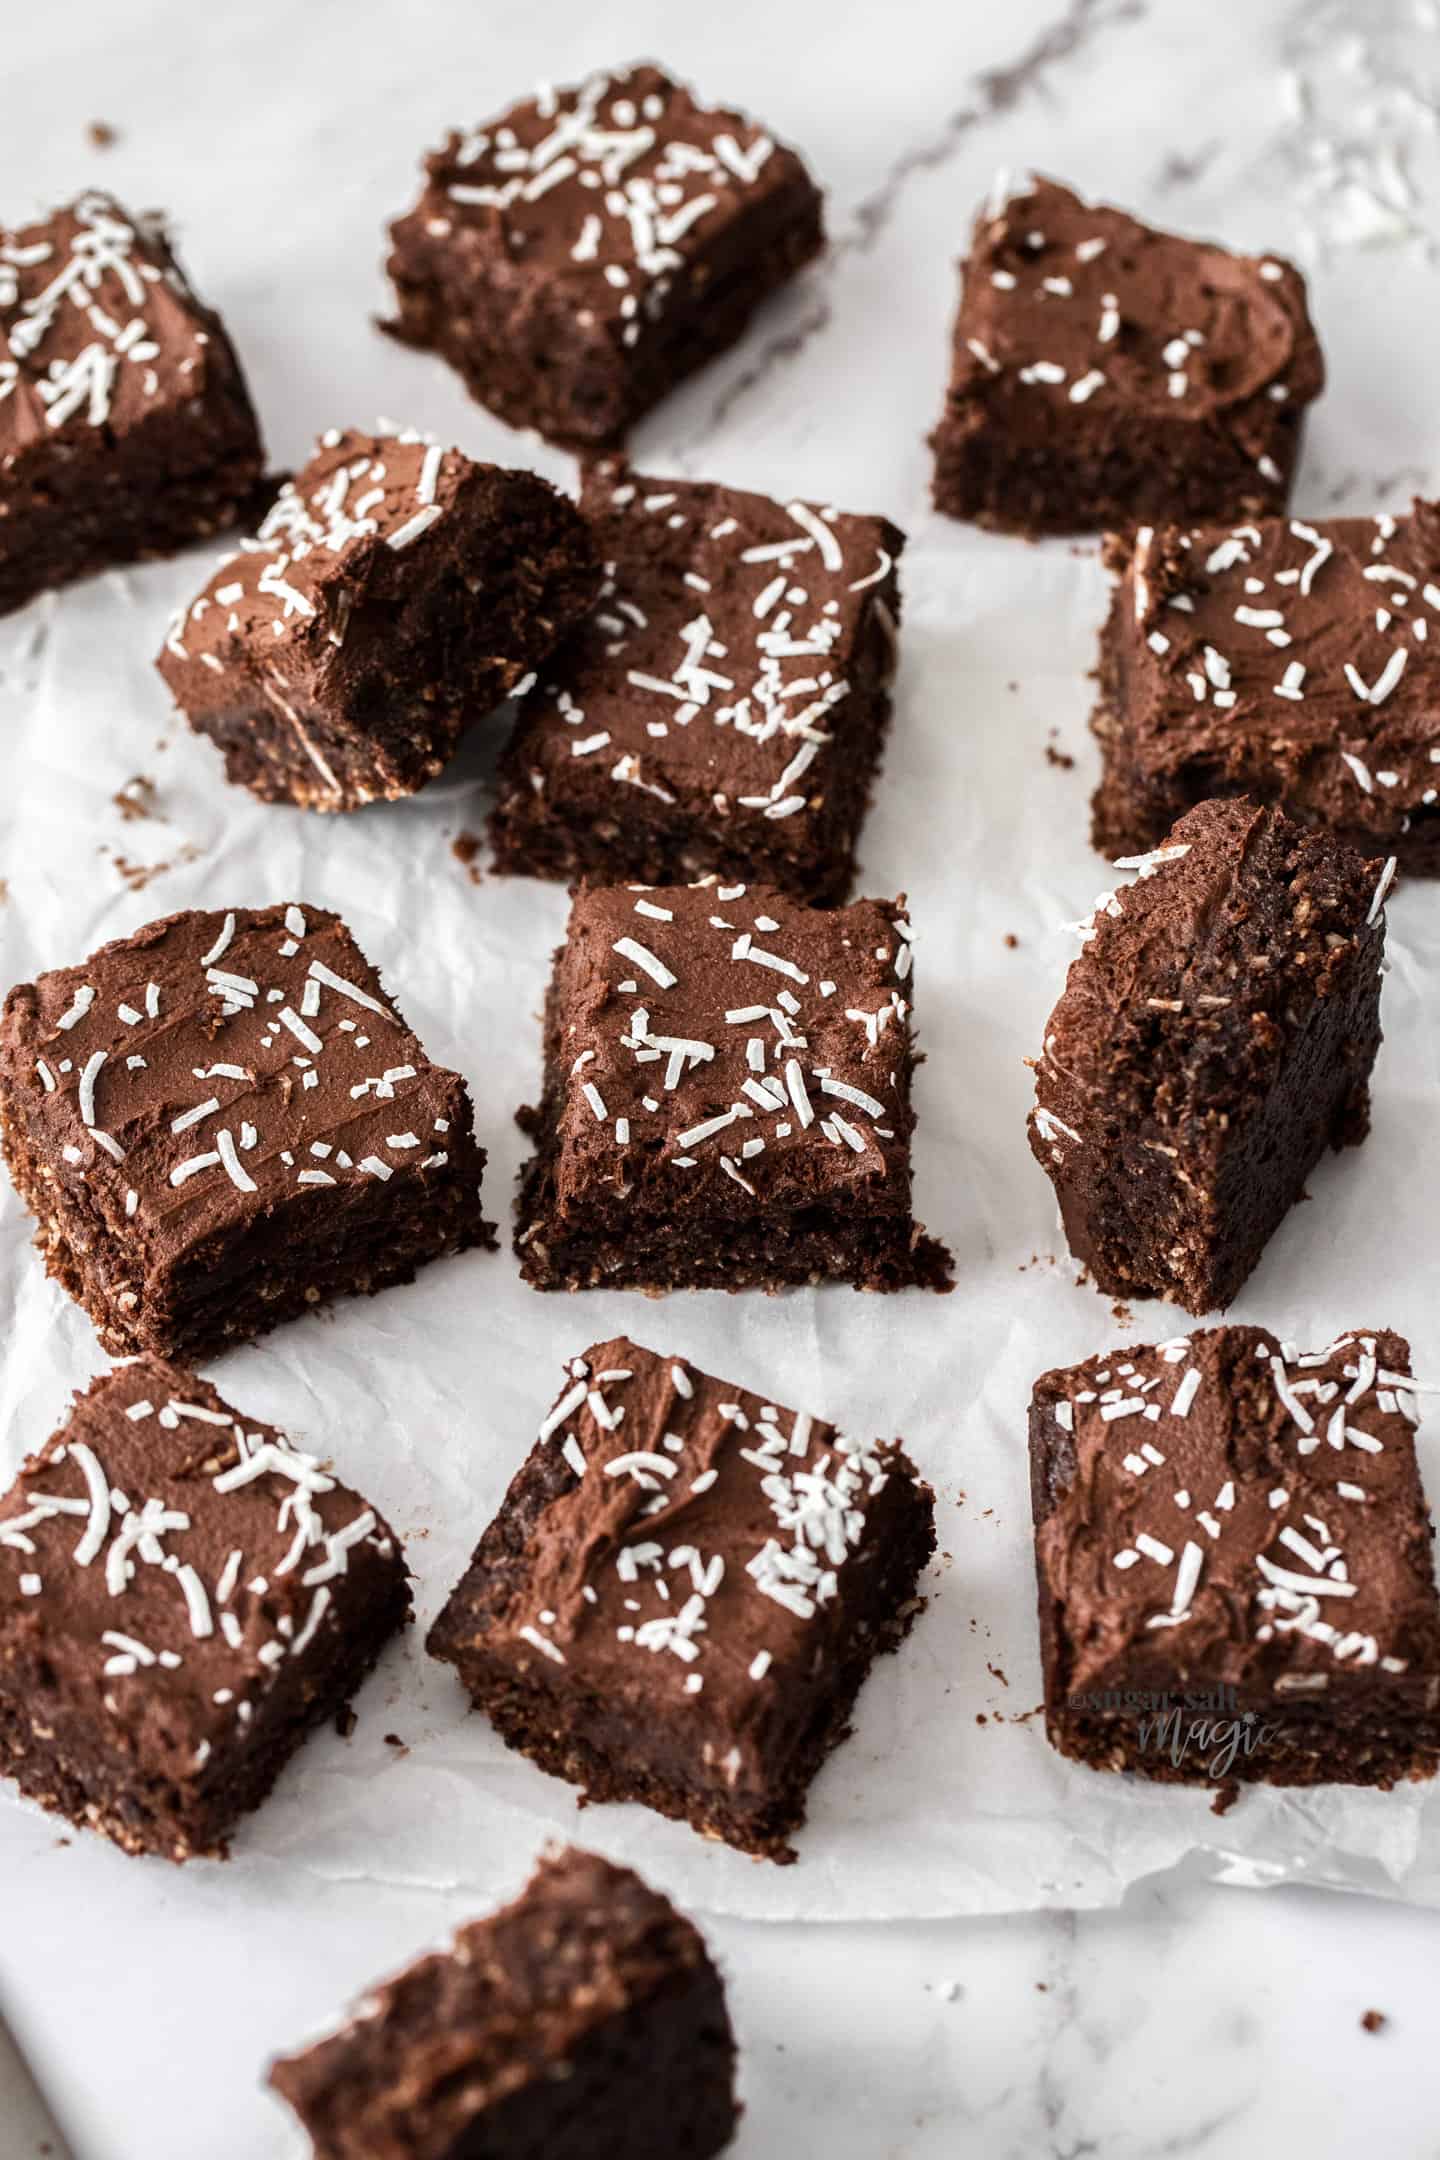 13 pieces of chocolate fudge slice topped with coconut on a sheet of baking paper.